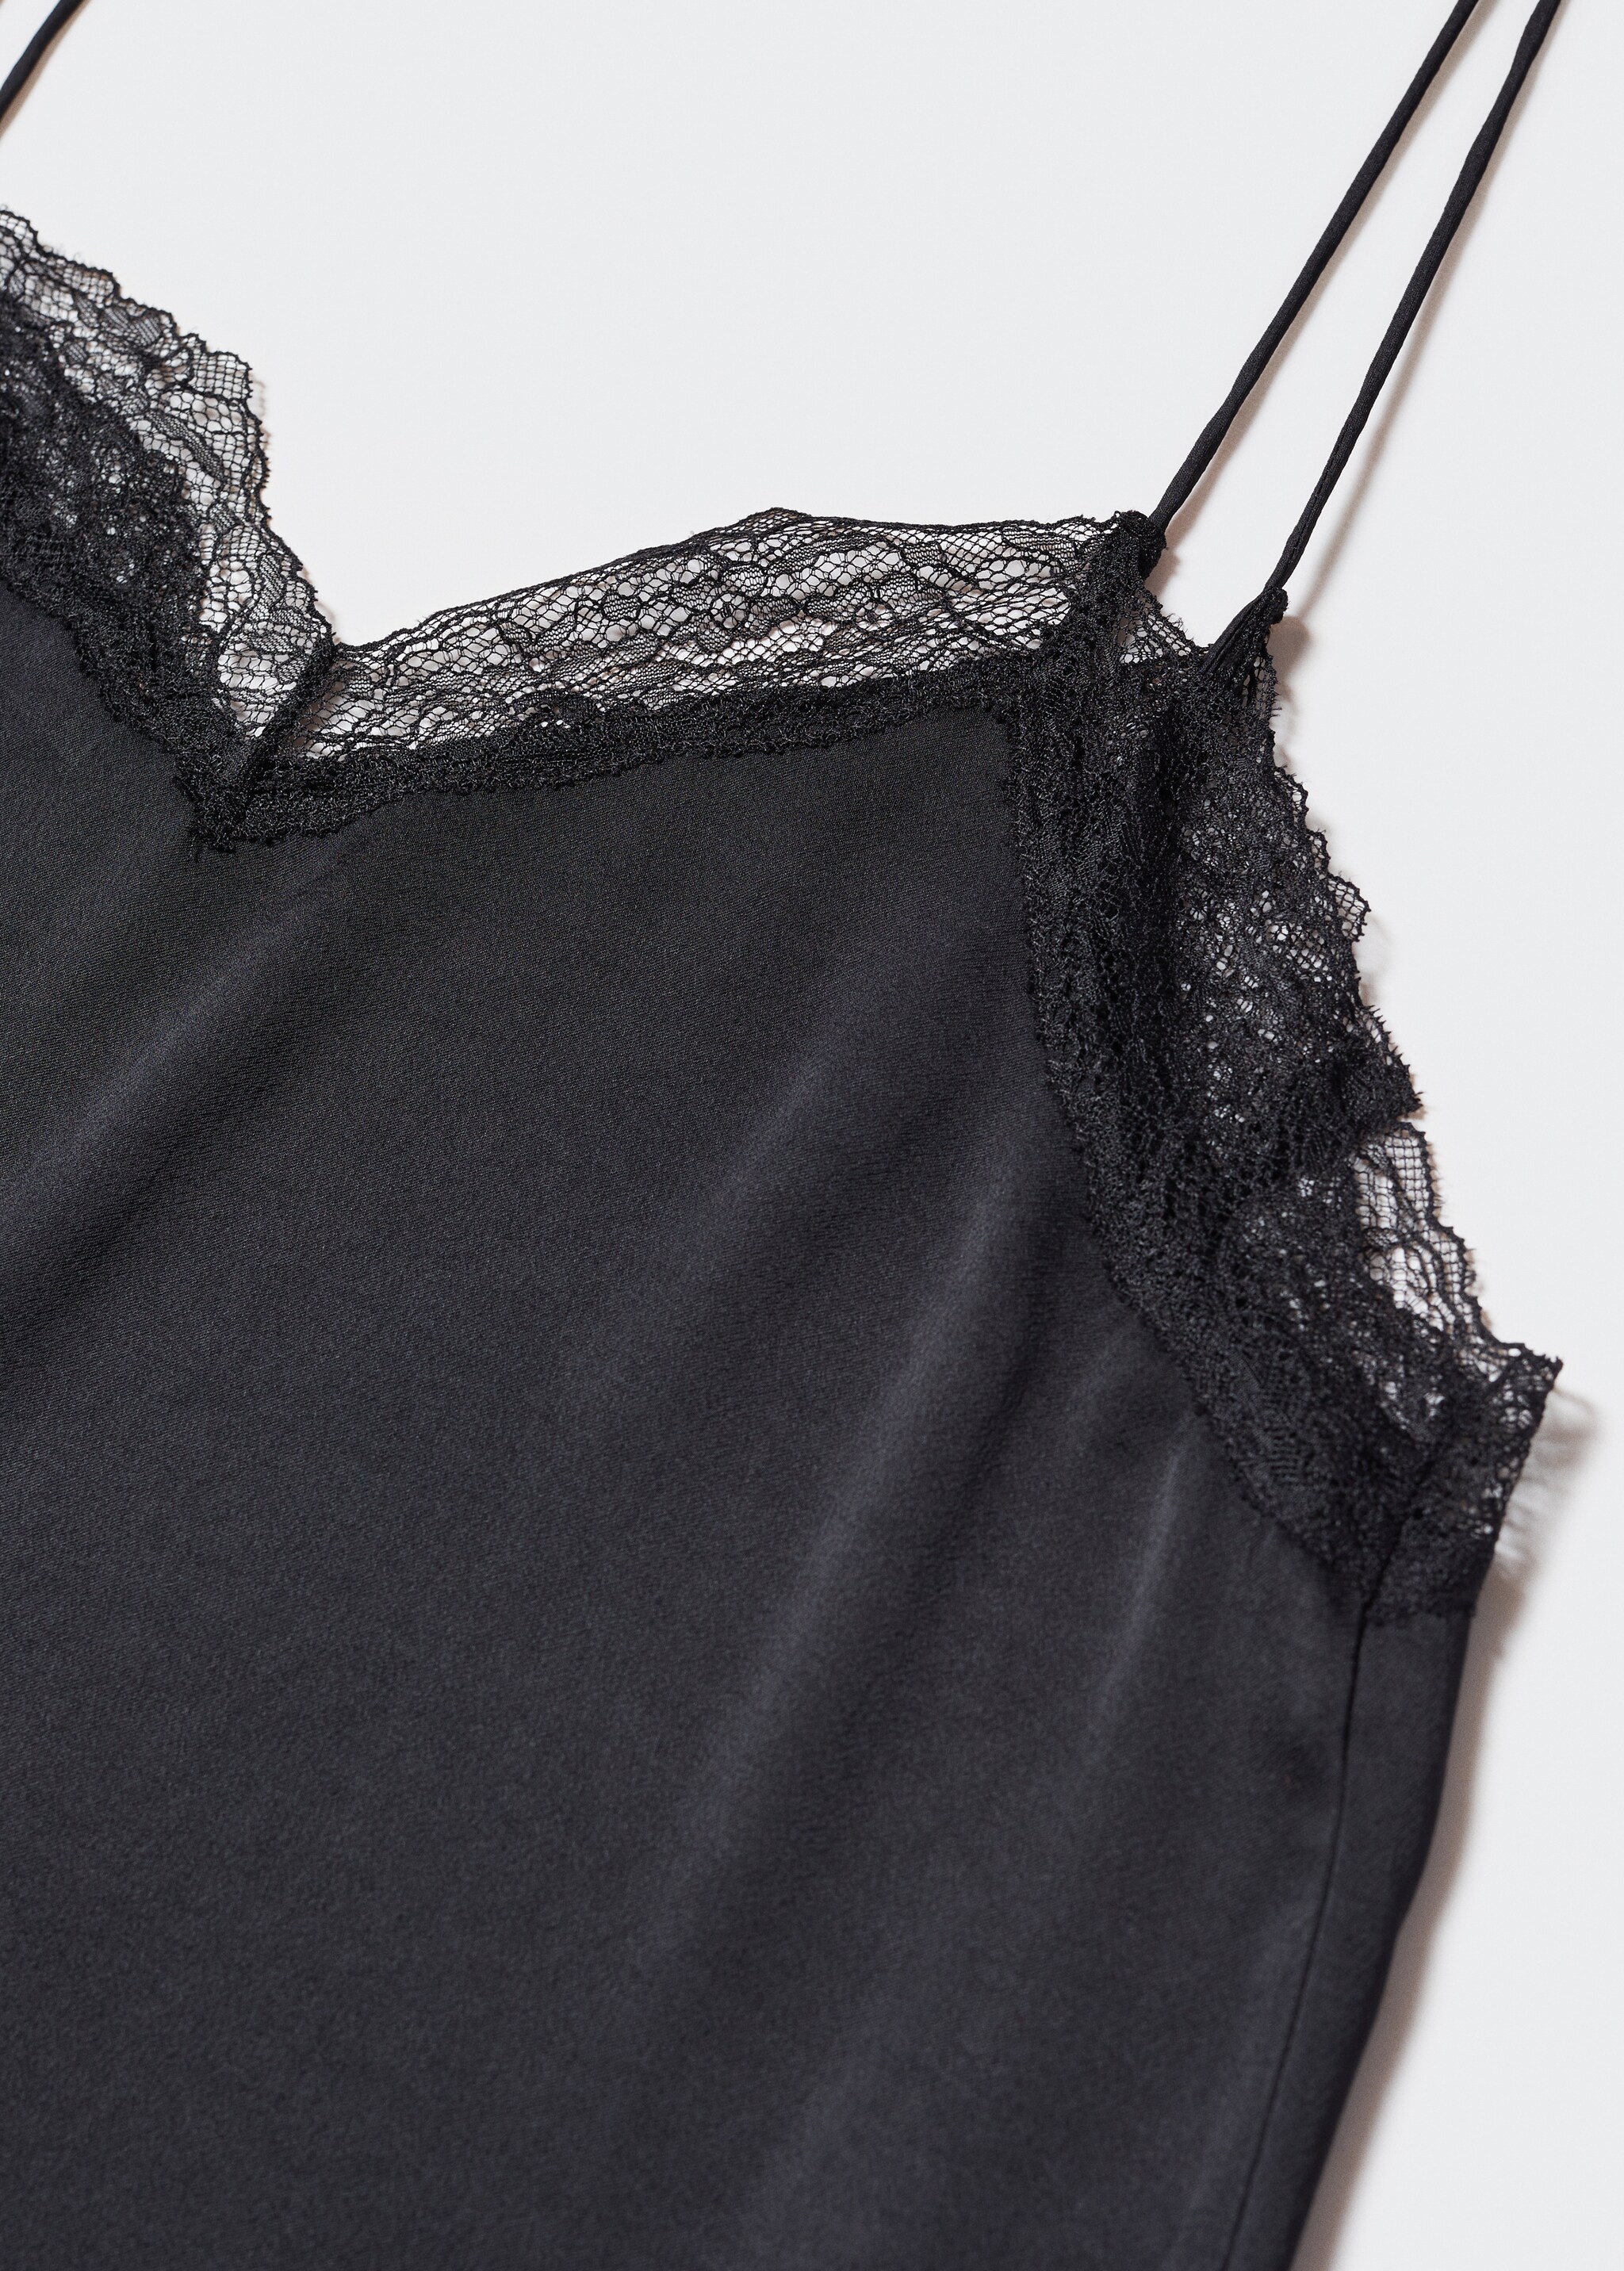 Lace top - Details of the article 8